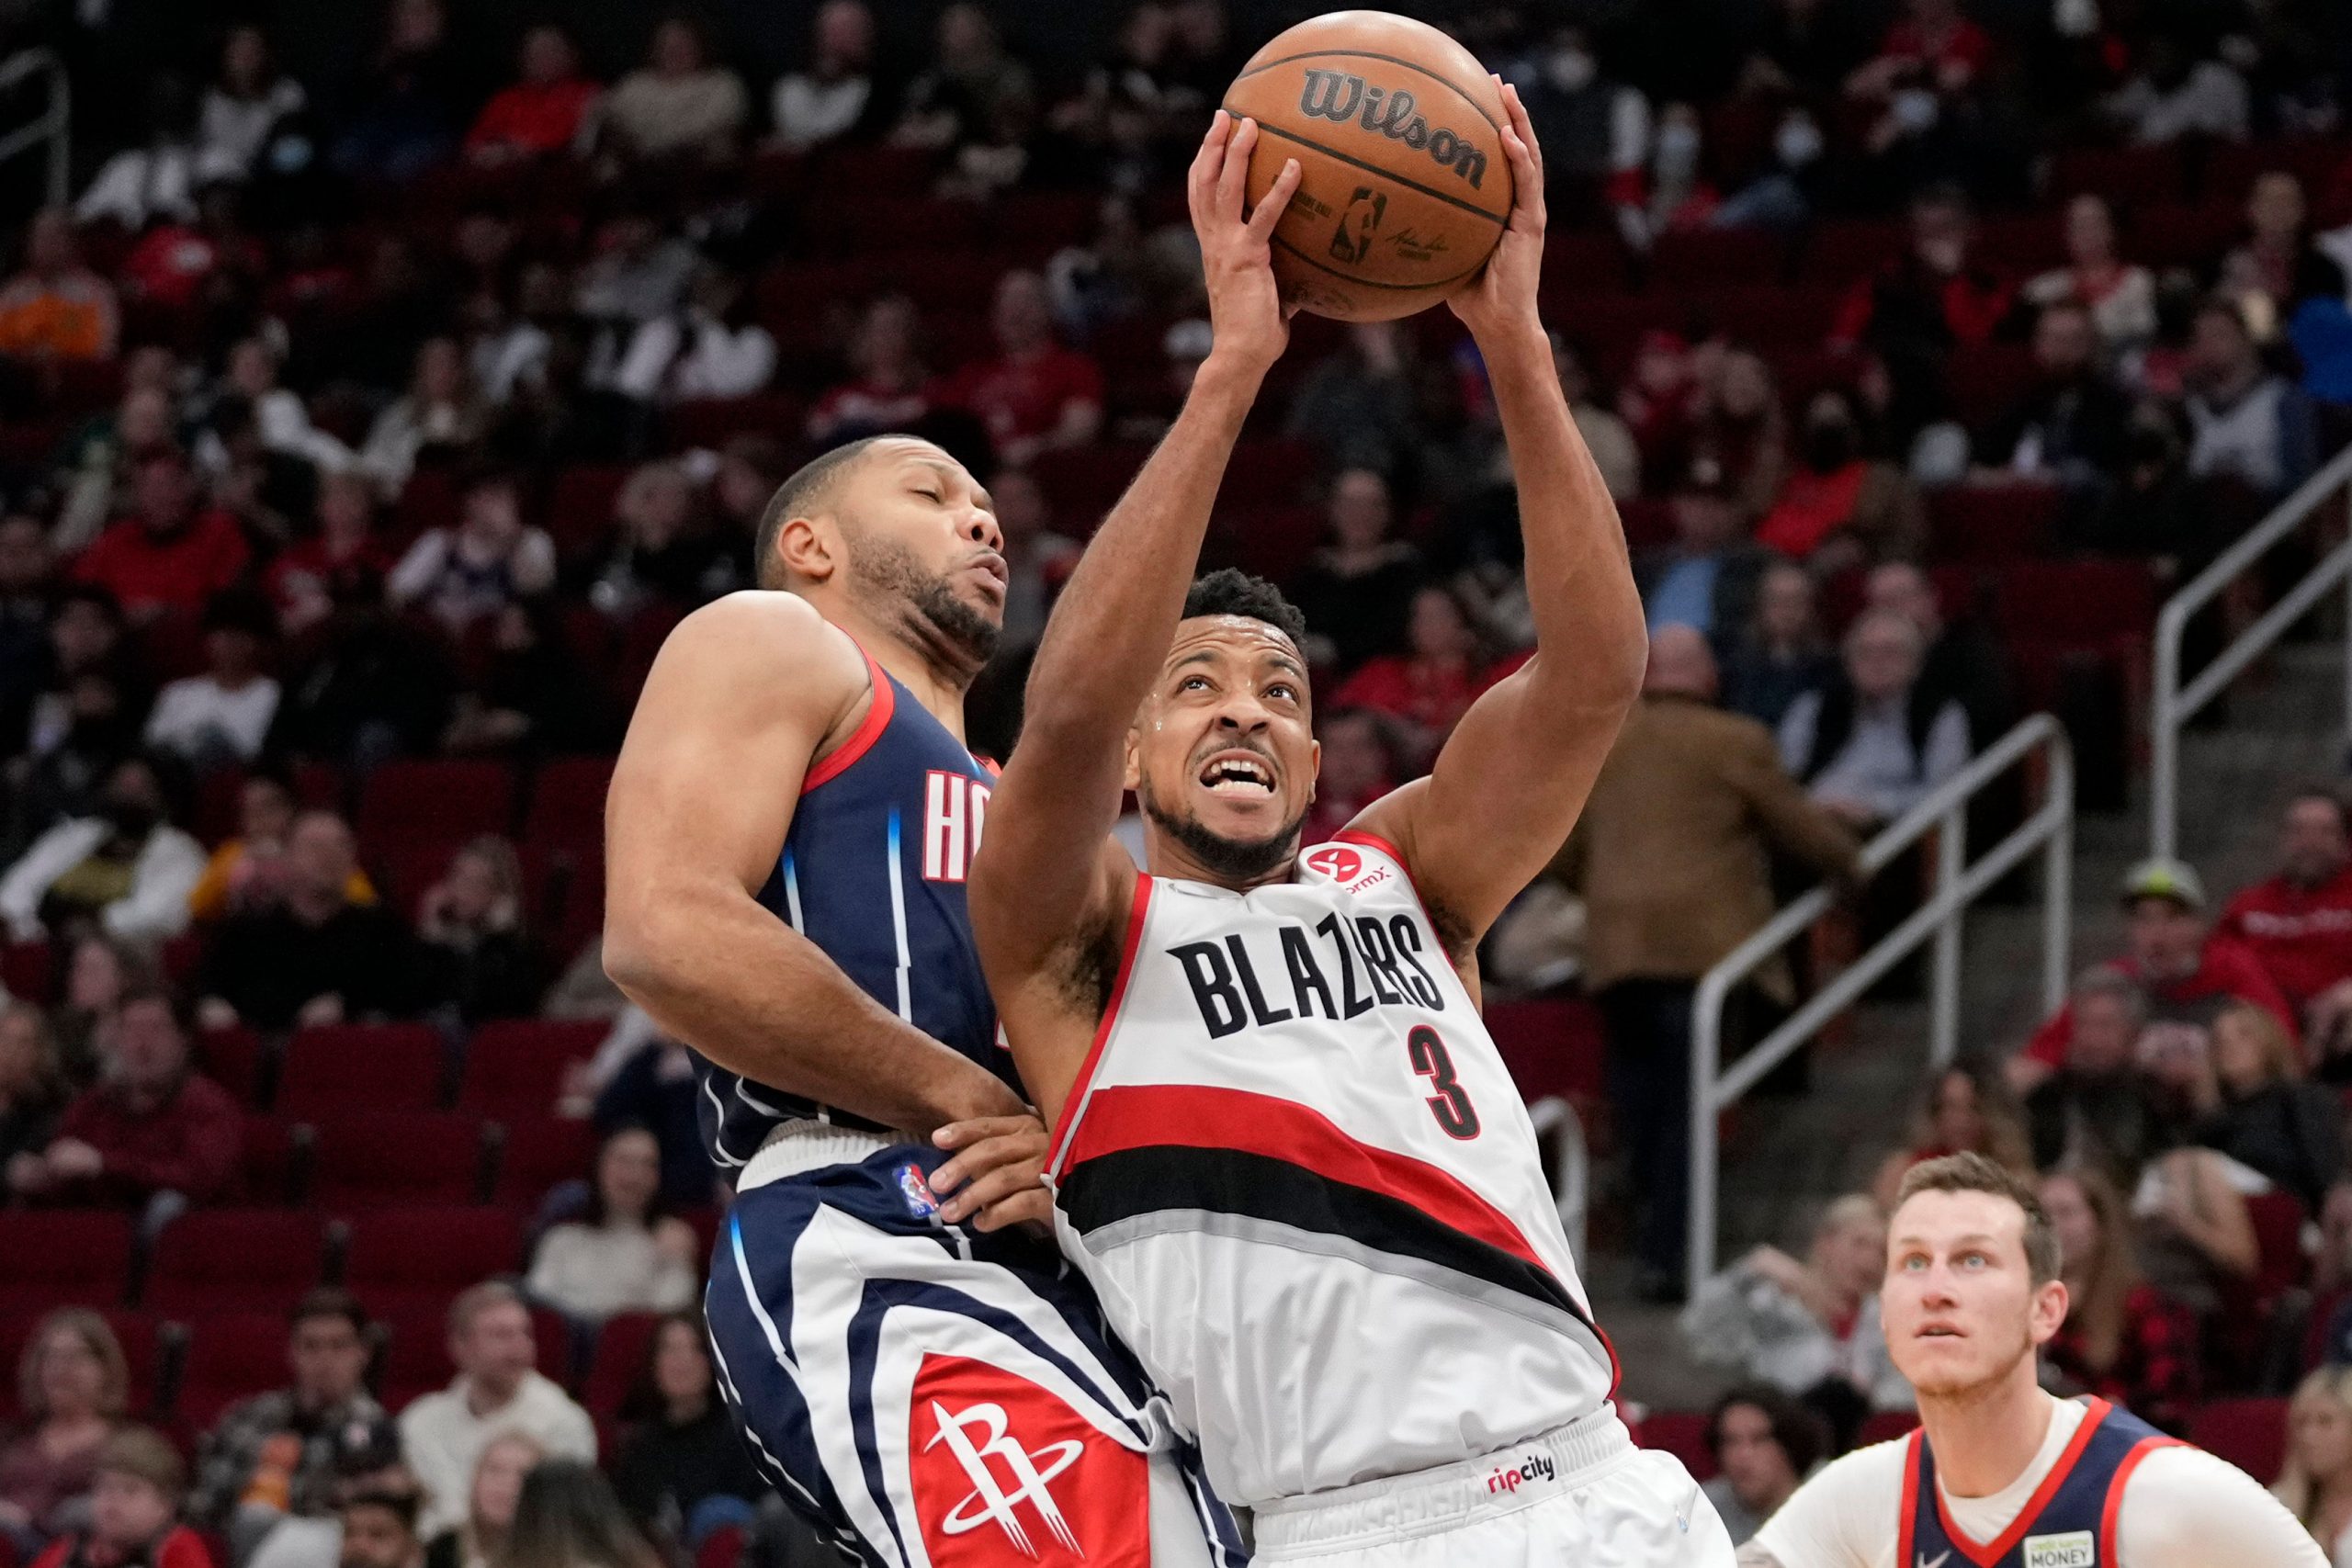 New Orleans Pelicans acquire C.J. McCollum in 7-player trade: Reports